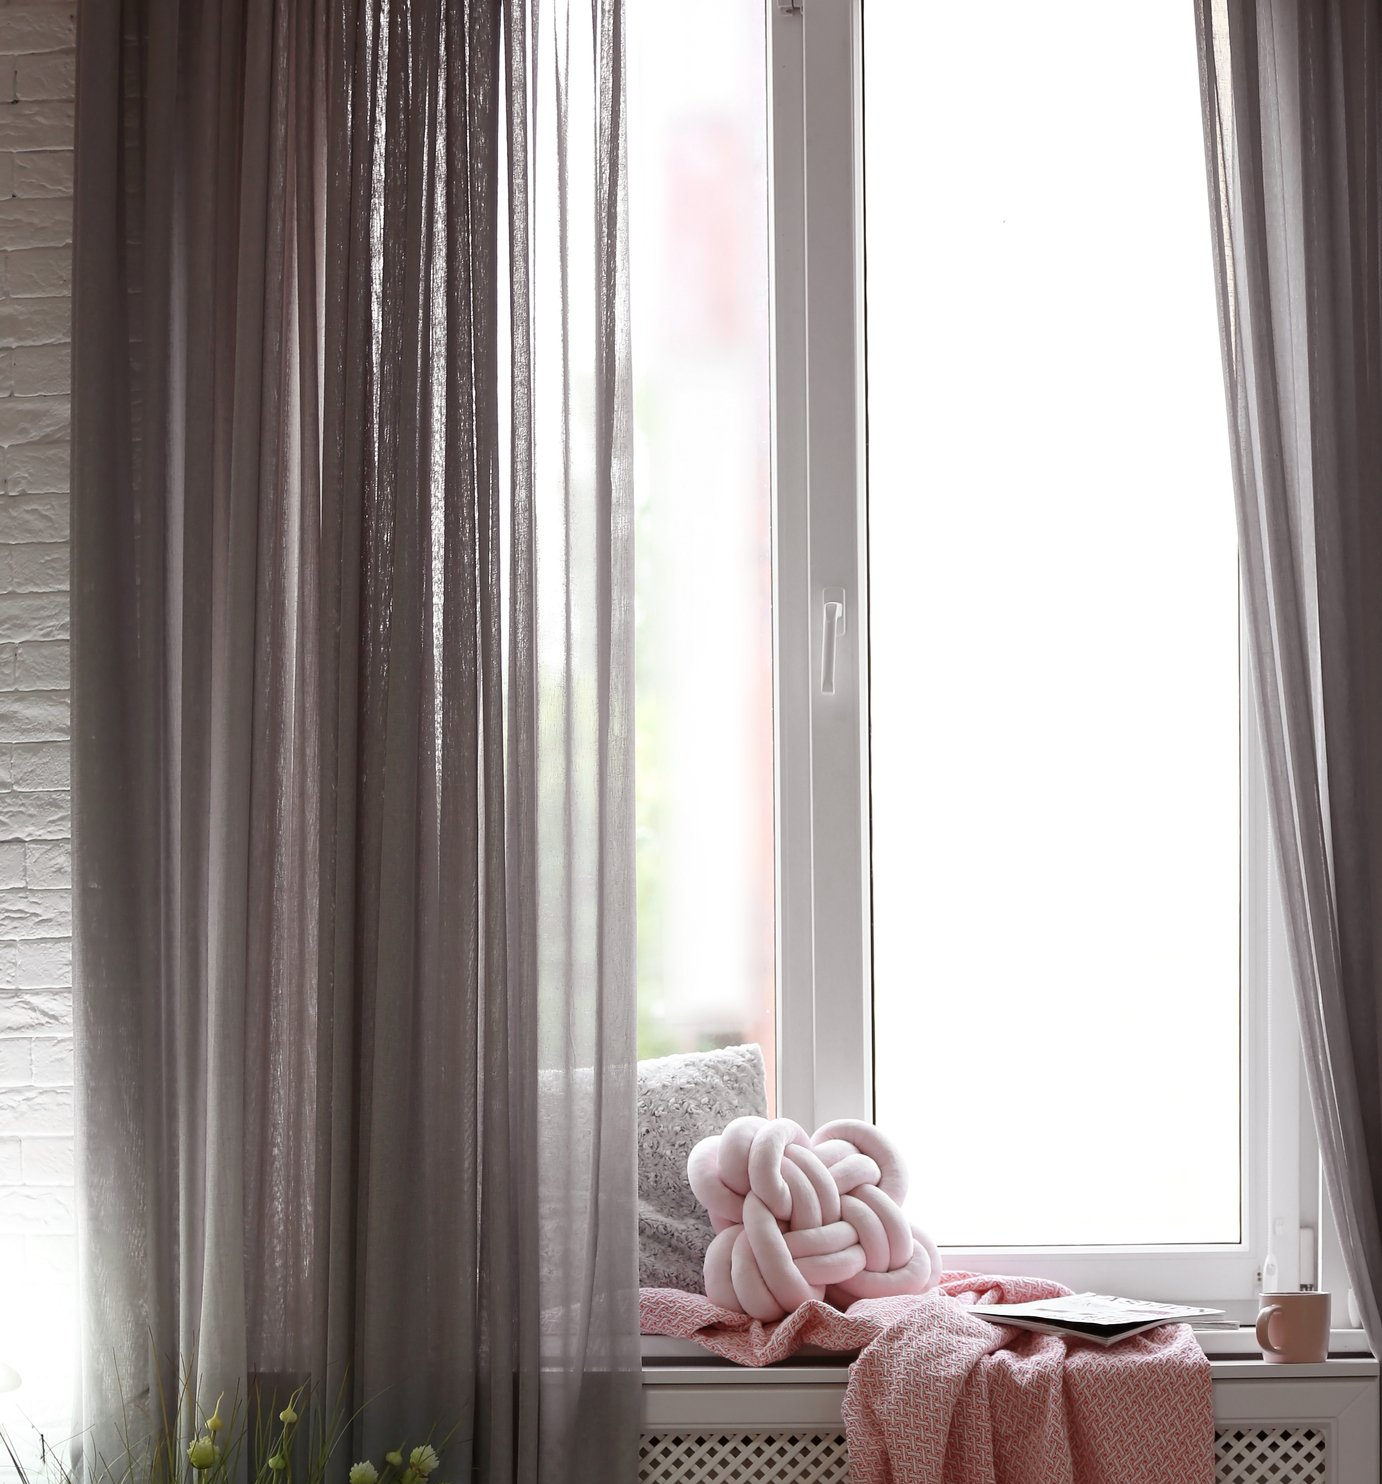 Close up of window with soft cushion and rug on sill, backed by purple toned semi-opaque sheer curtains.